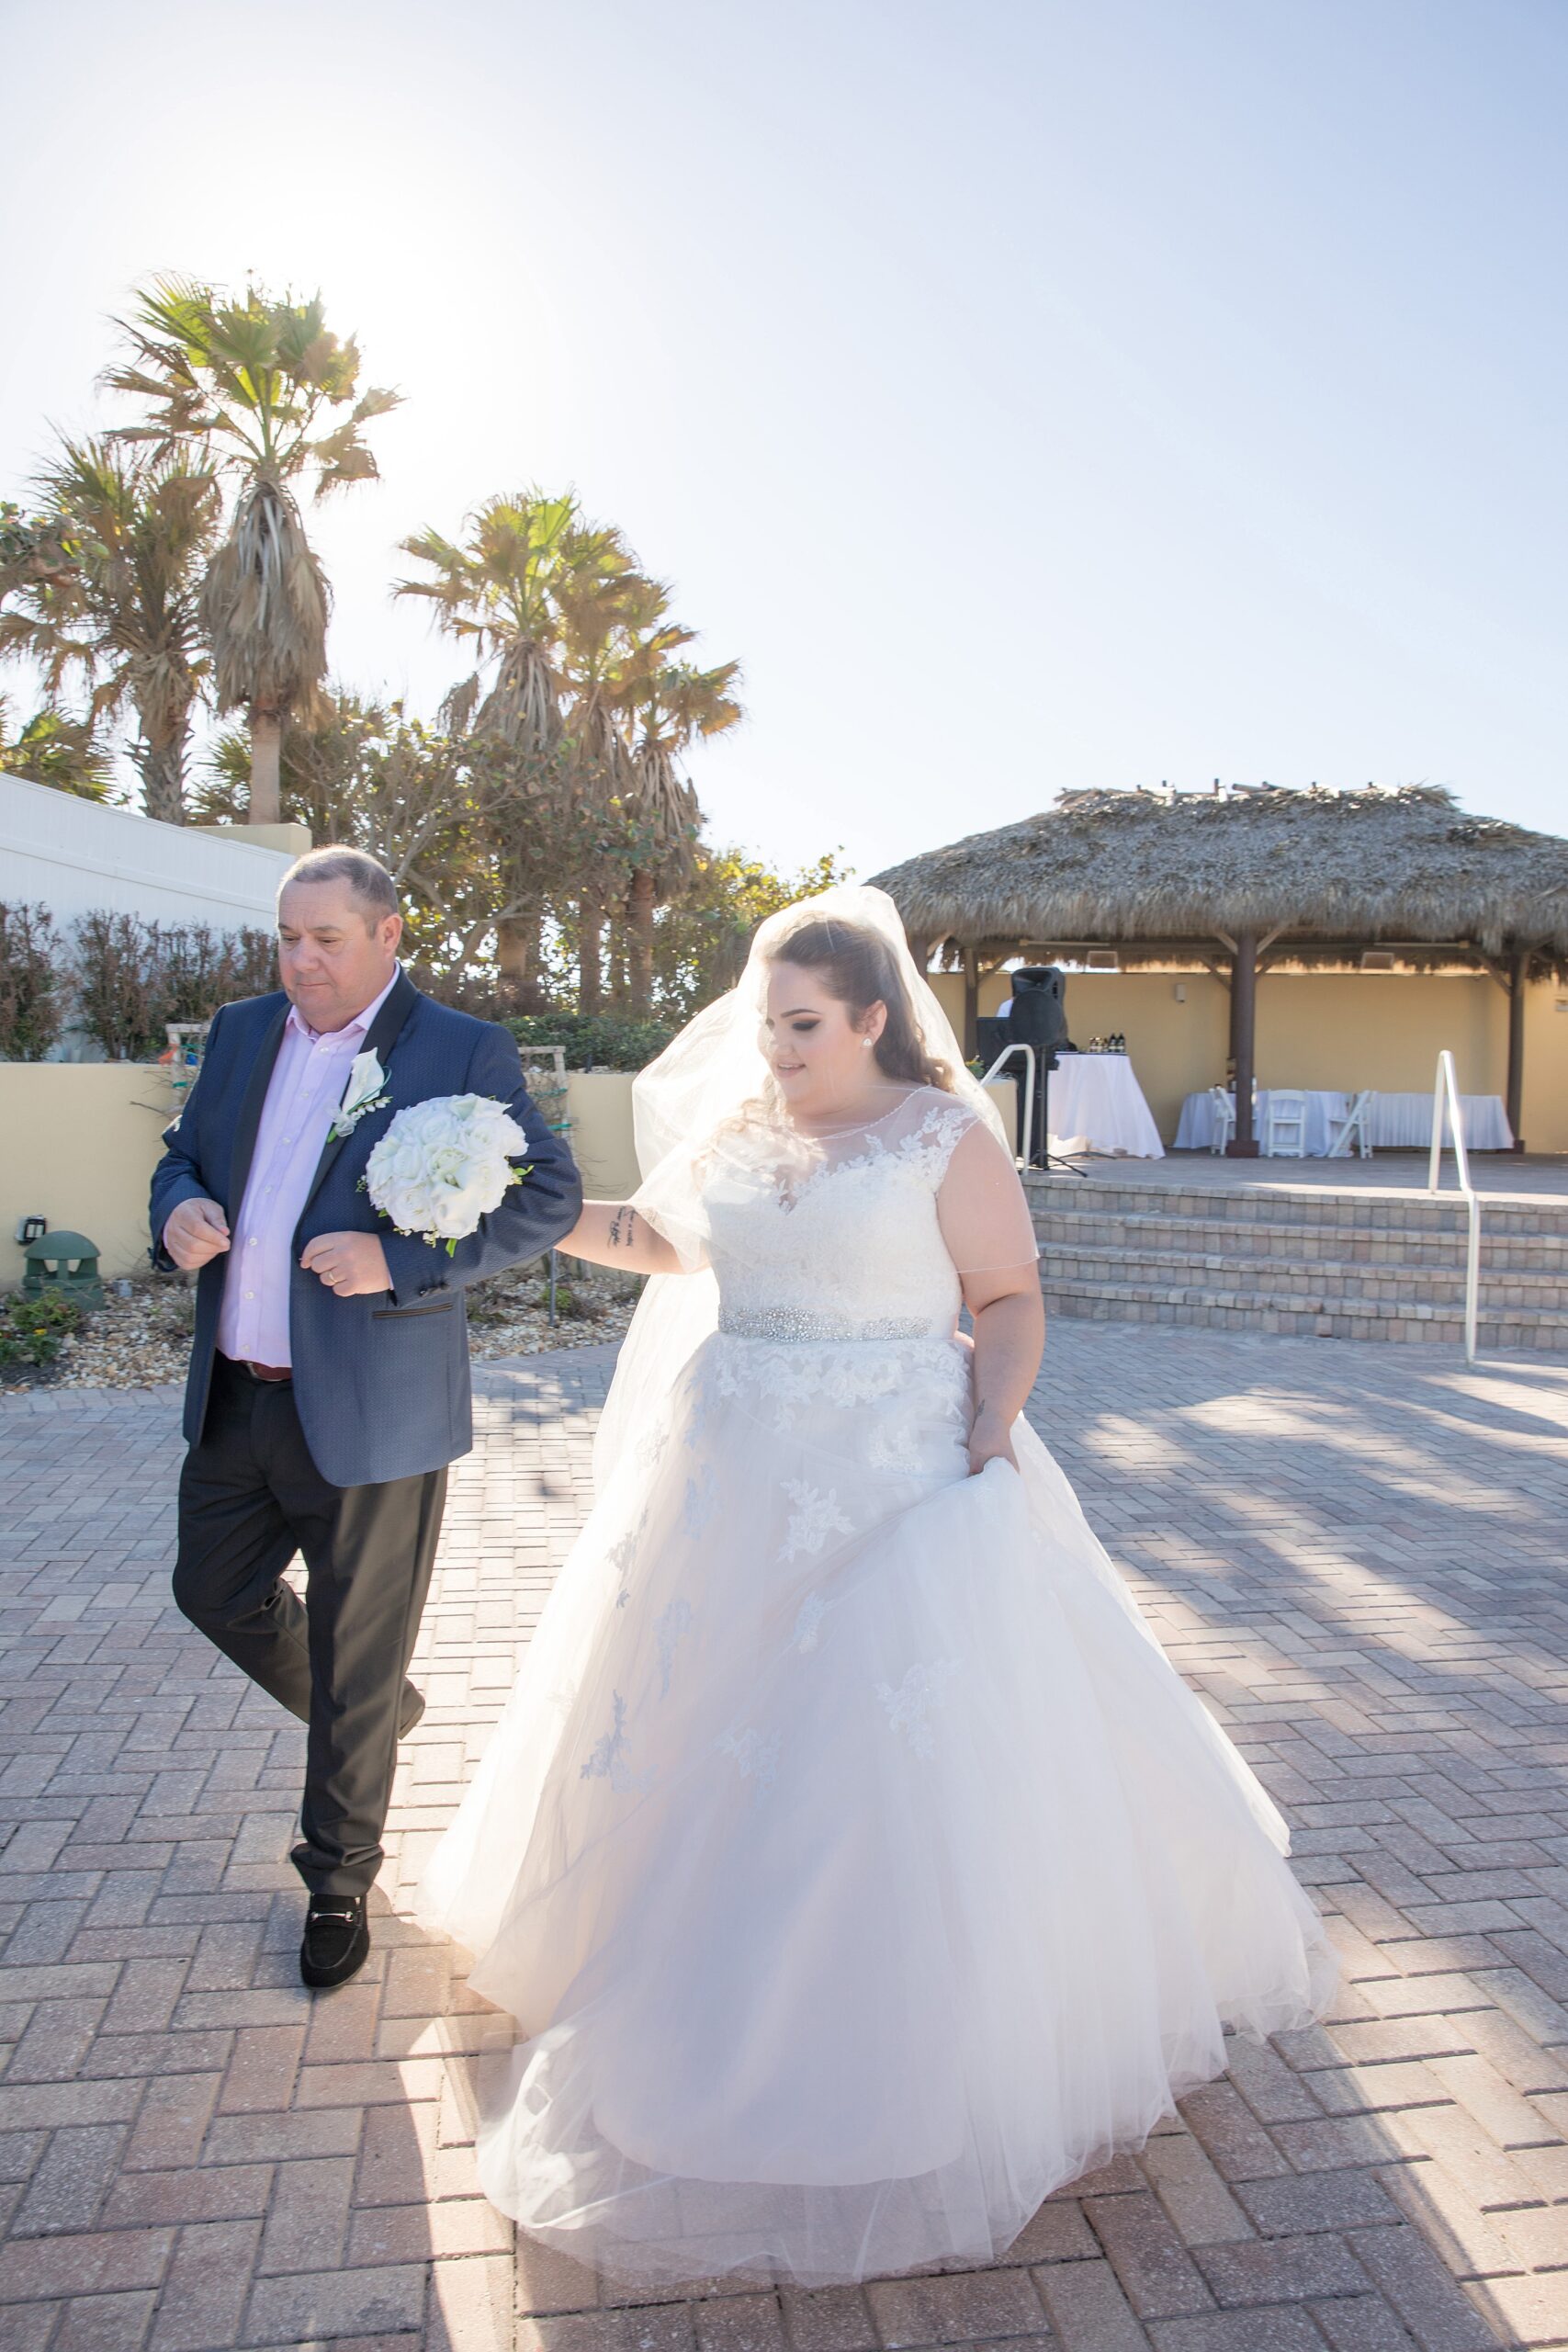 A father walks his daughter down the poolside aisle of her wedding ceremony